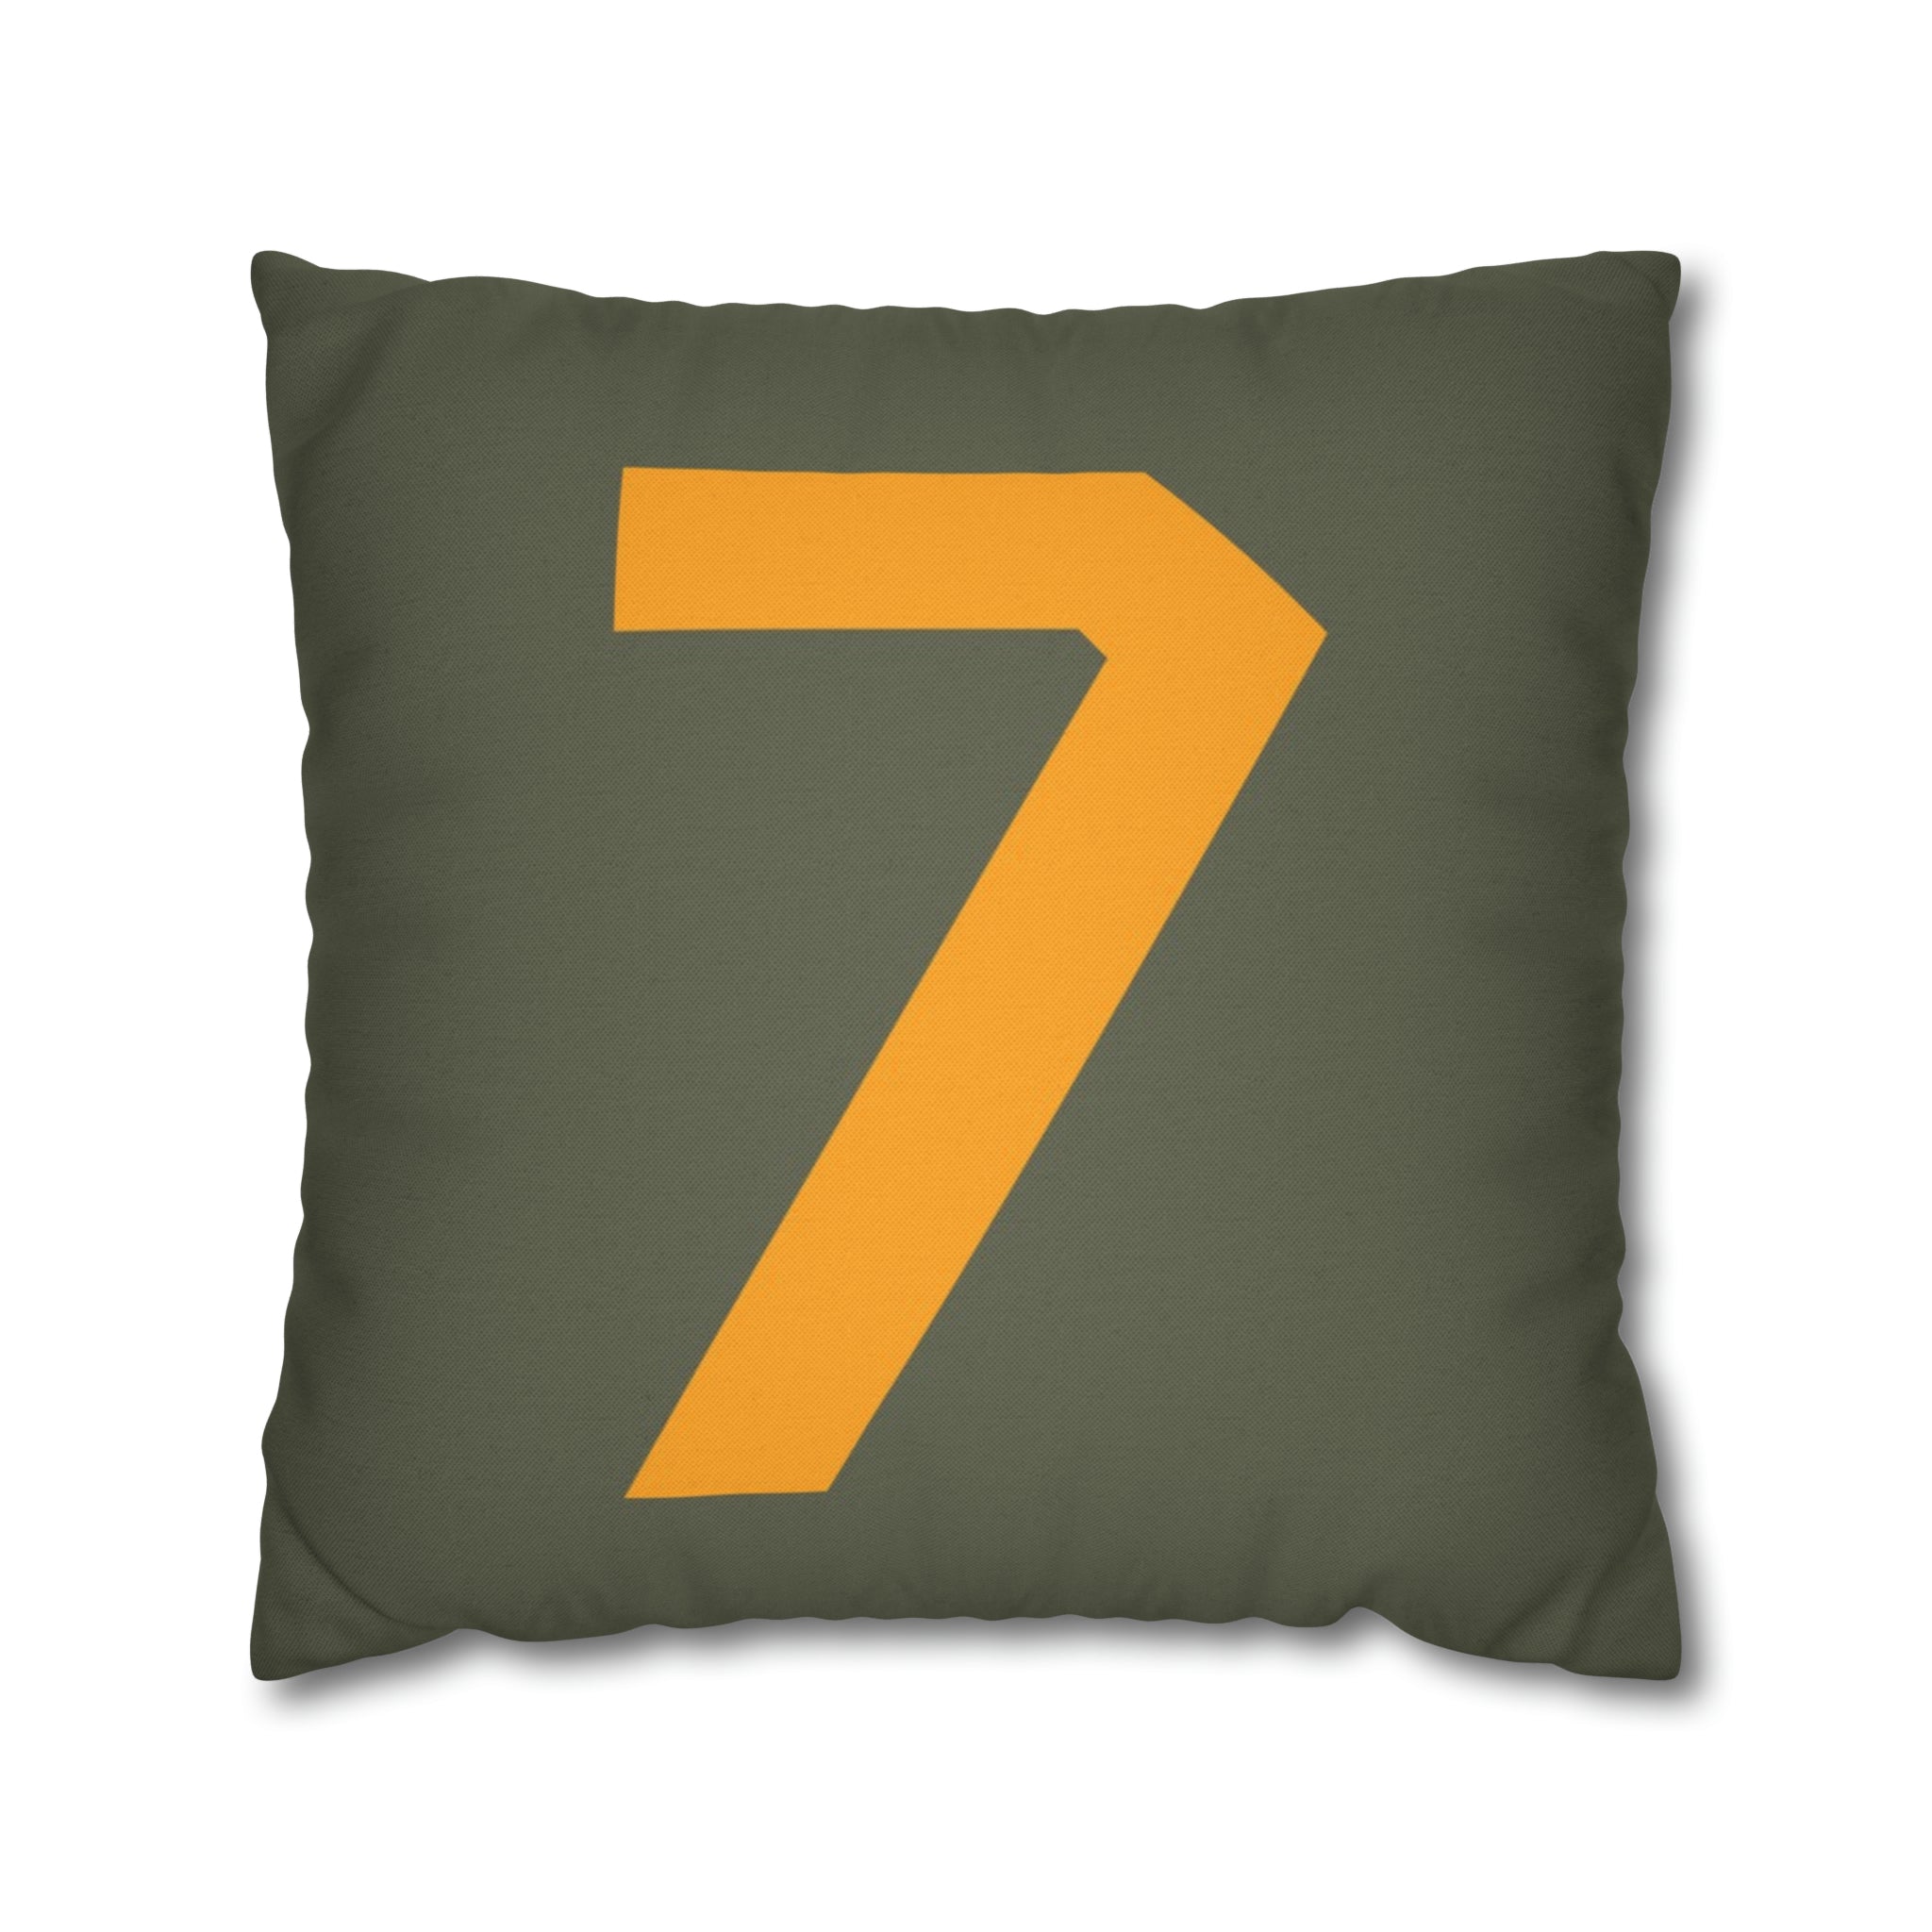 WWII USAAF Number "7" Square Pillowcase - I Love a Hangar